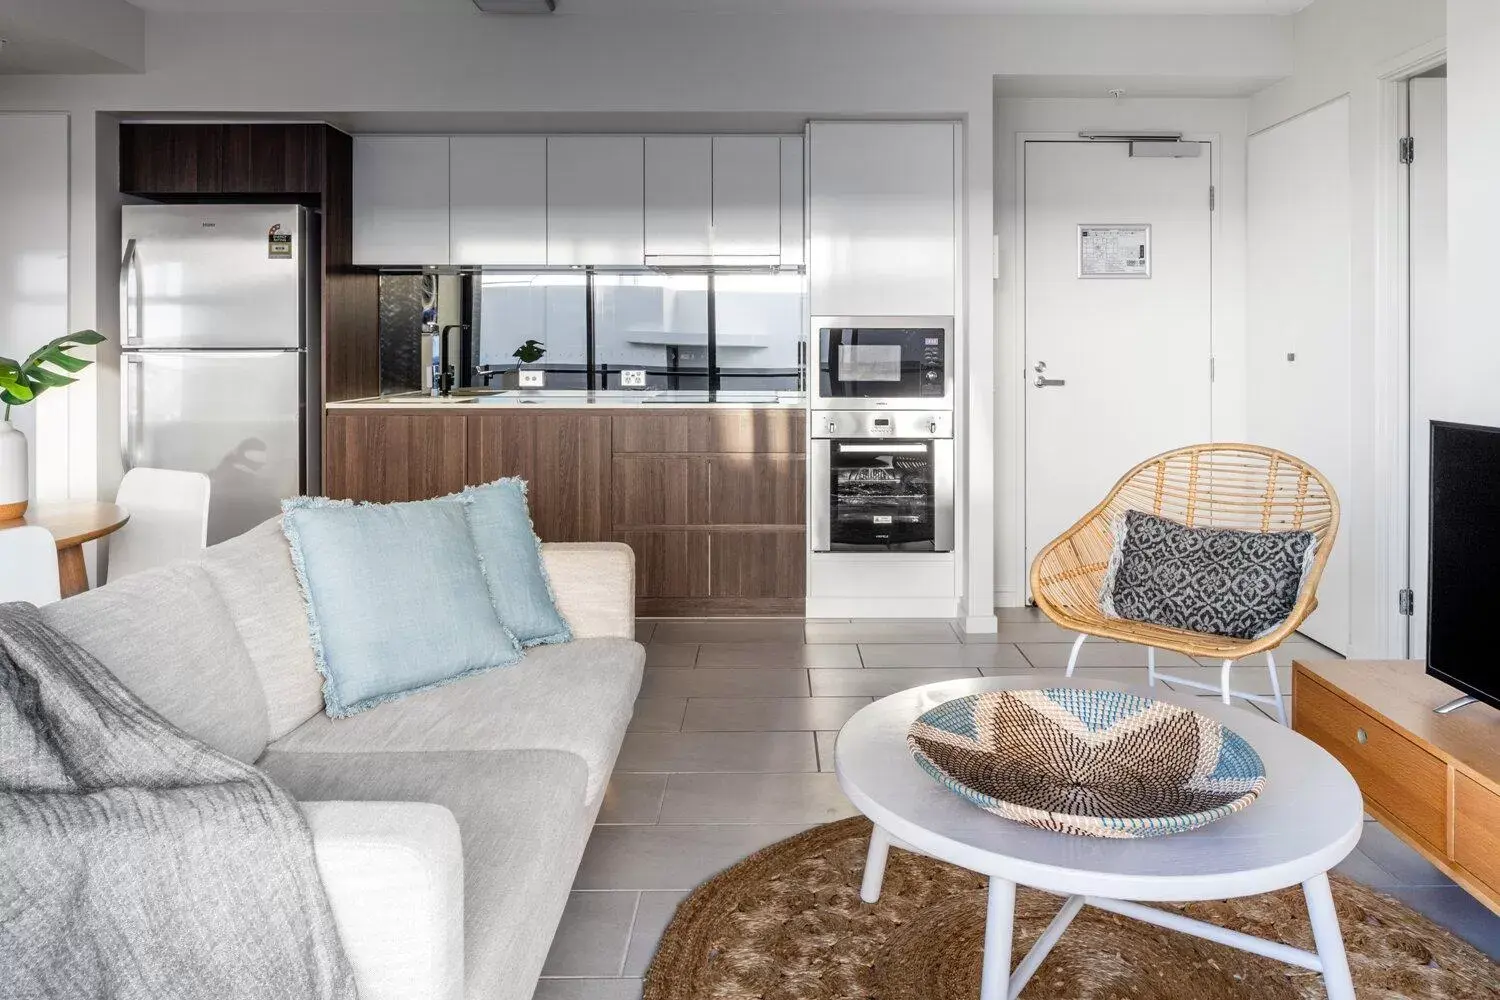 Kitchen or kitchenette, Kitchen/Kitchenette in First Light Mooloolaba, Ascend Hotel Collection